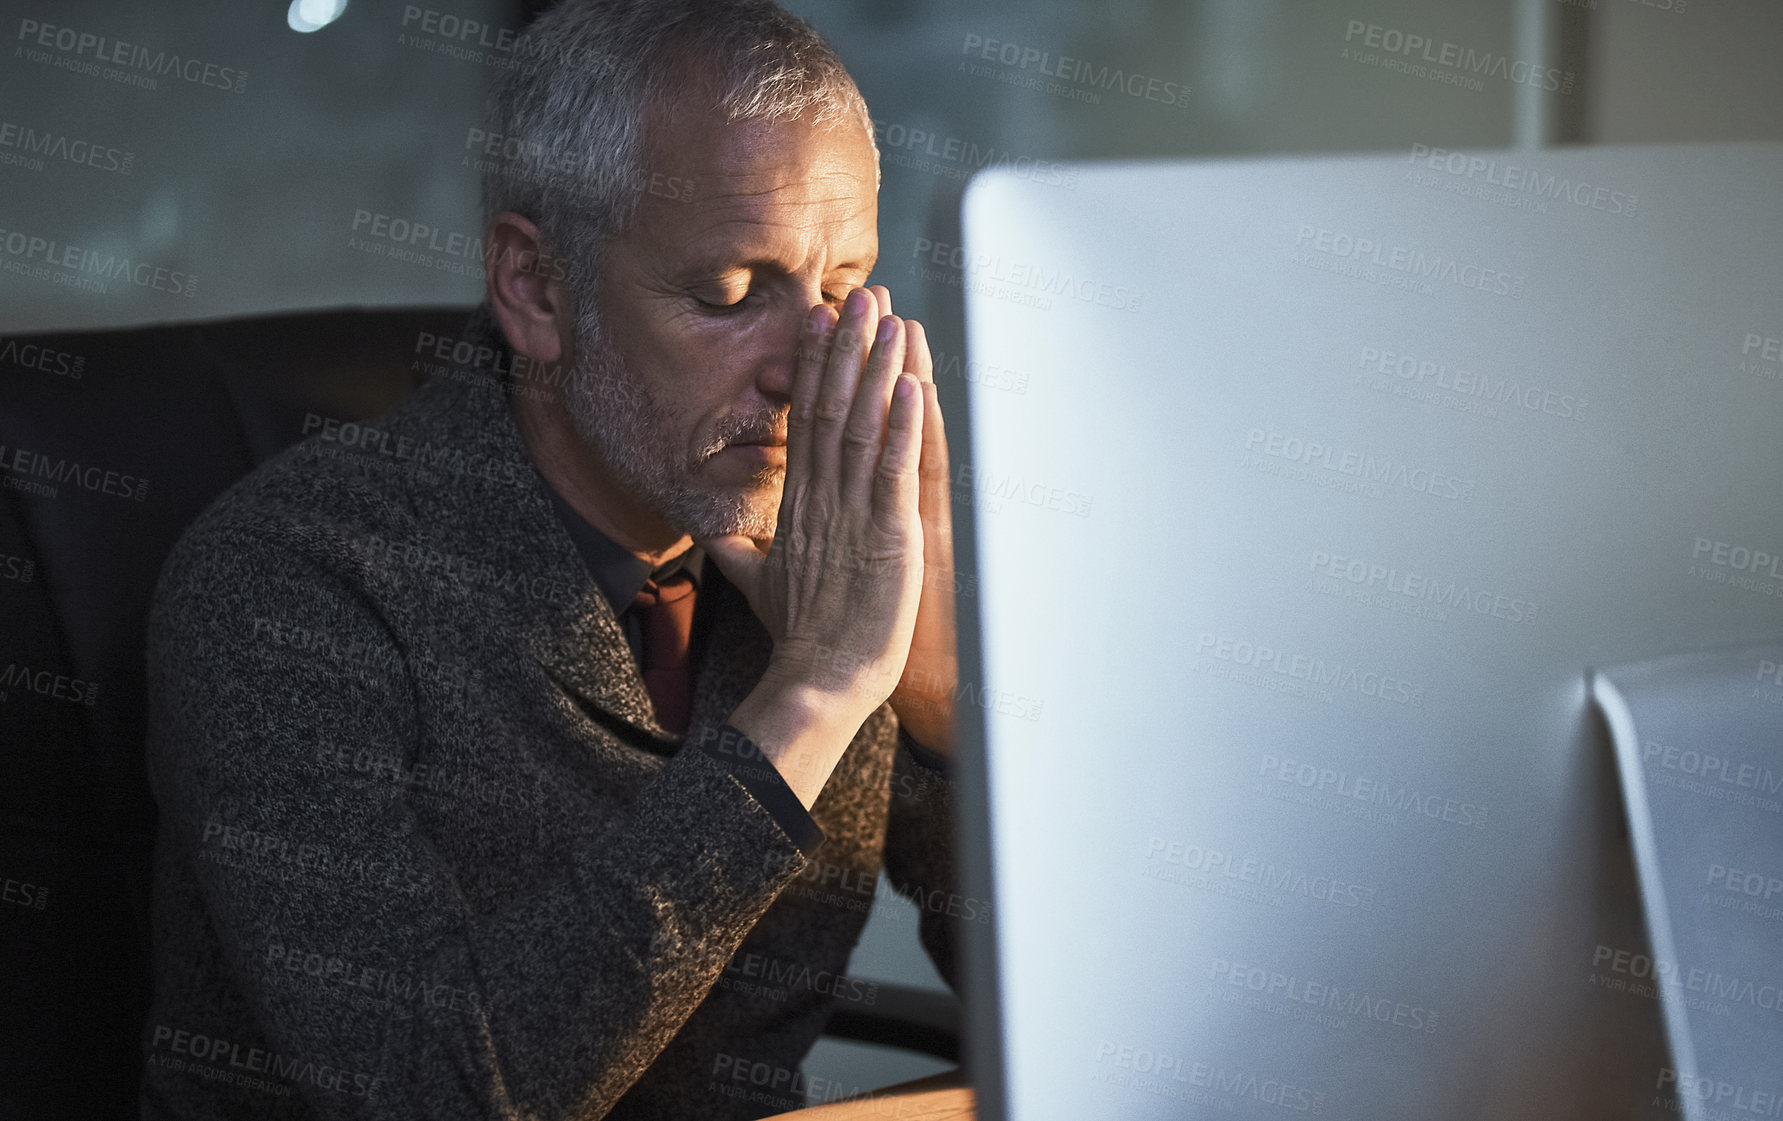 Buy stock photo Cropped shot of a mature businessman looking stressed while working late at the office